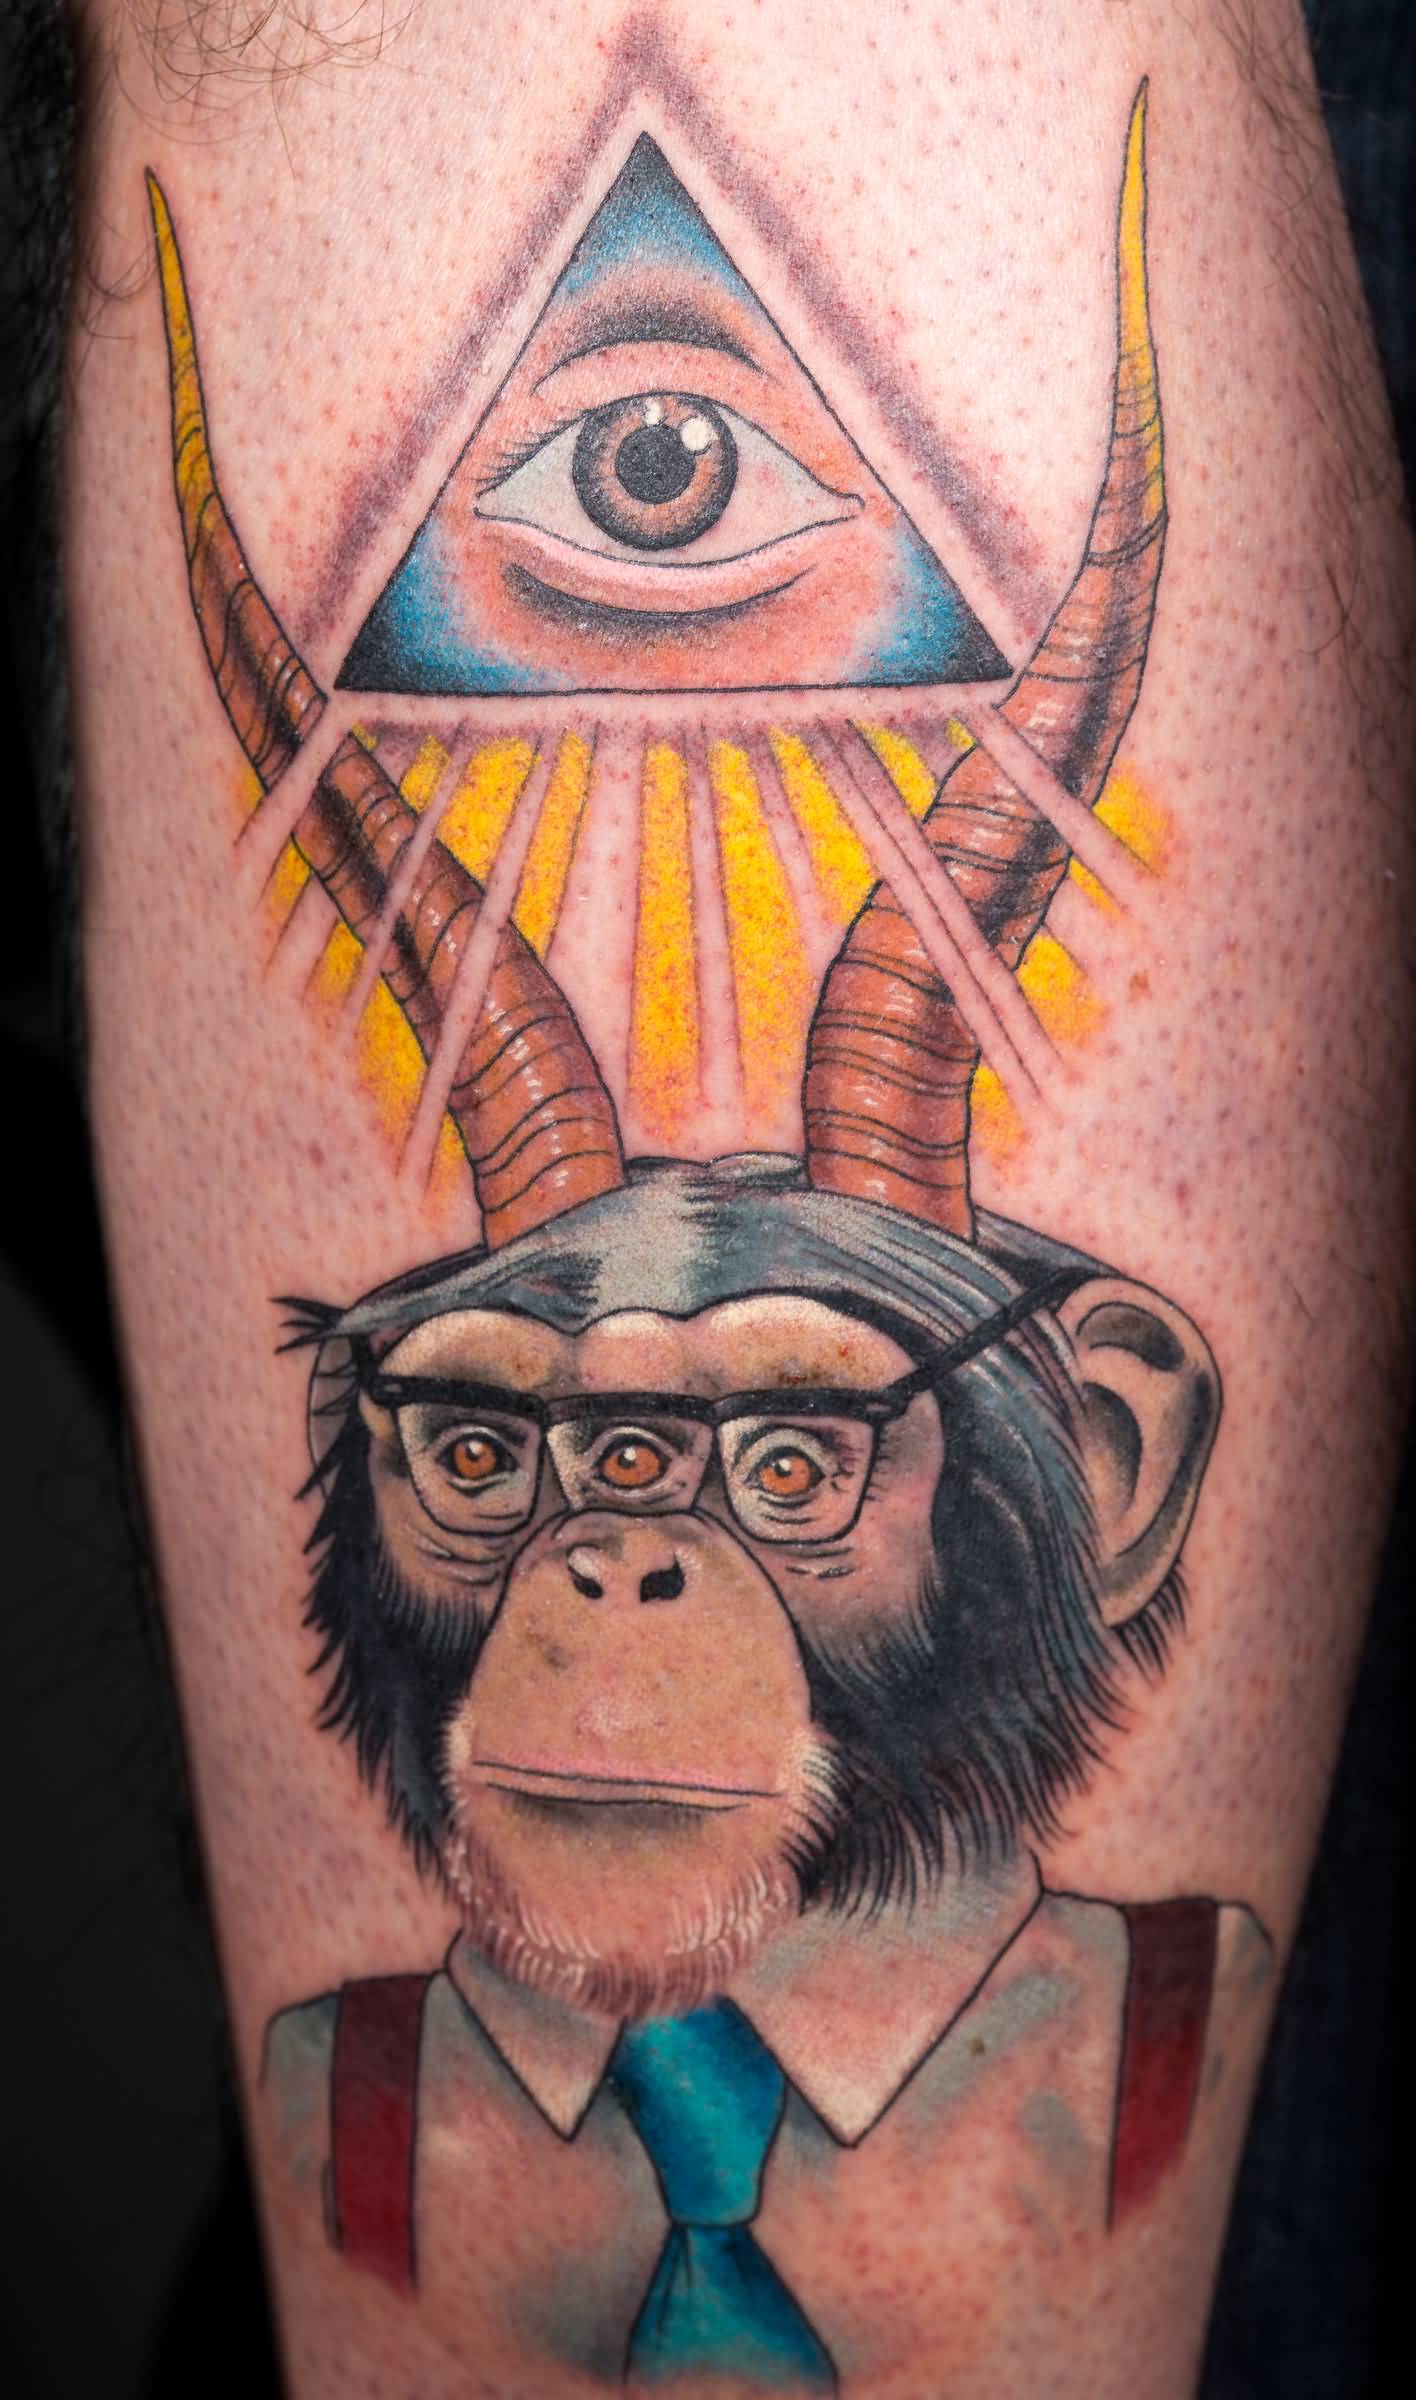 Chimpanzee With Horns And Triangle Eye Tattoo On Leg